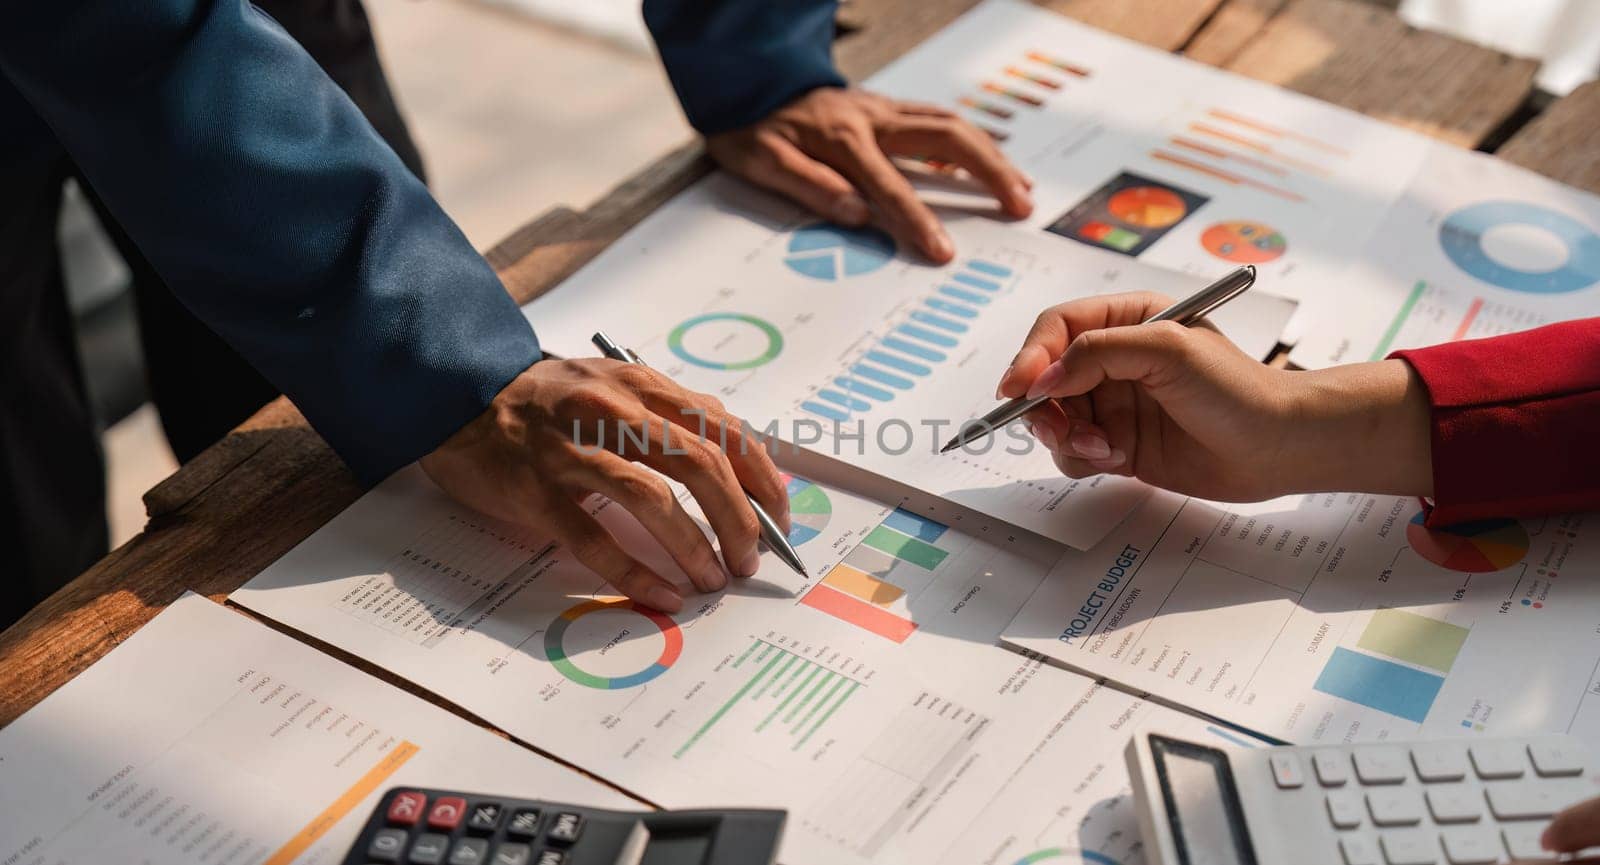 Business team analyzes financial business finance reports on laptop and graph documents during corporate meeting discussions showing successful teamwork, business meeting ideas.